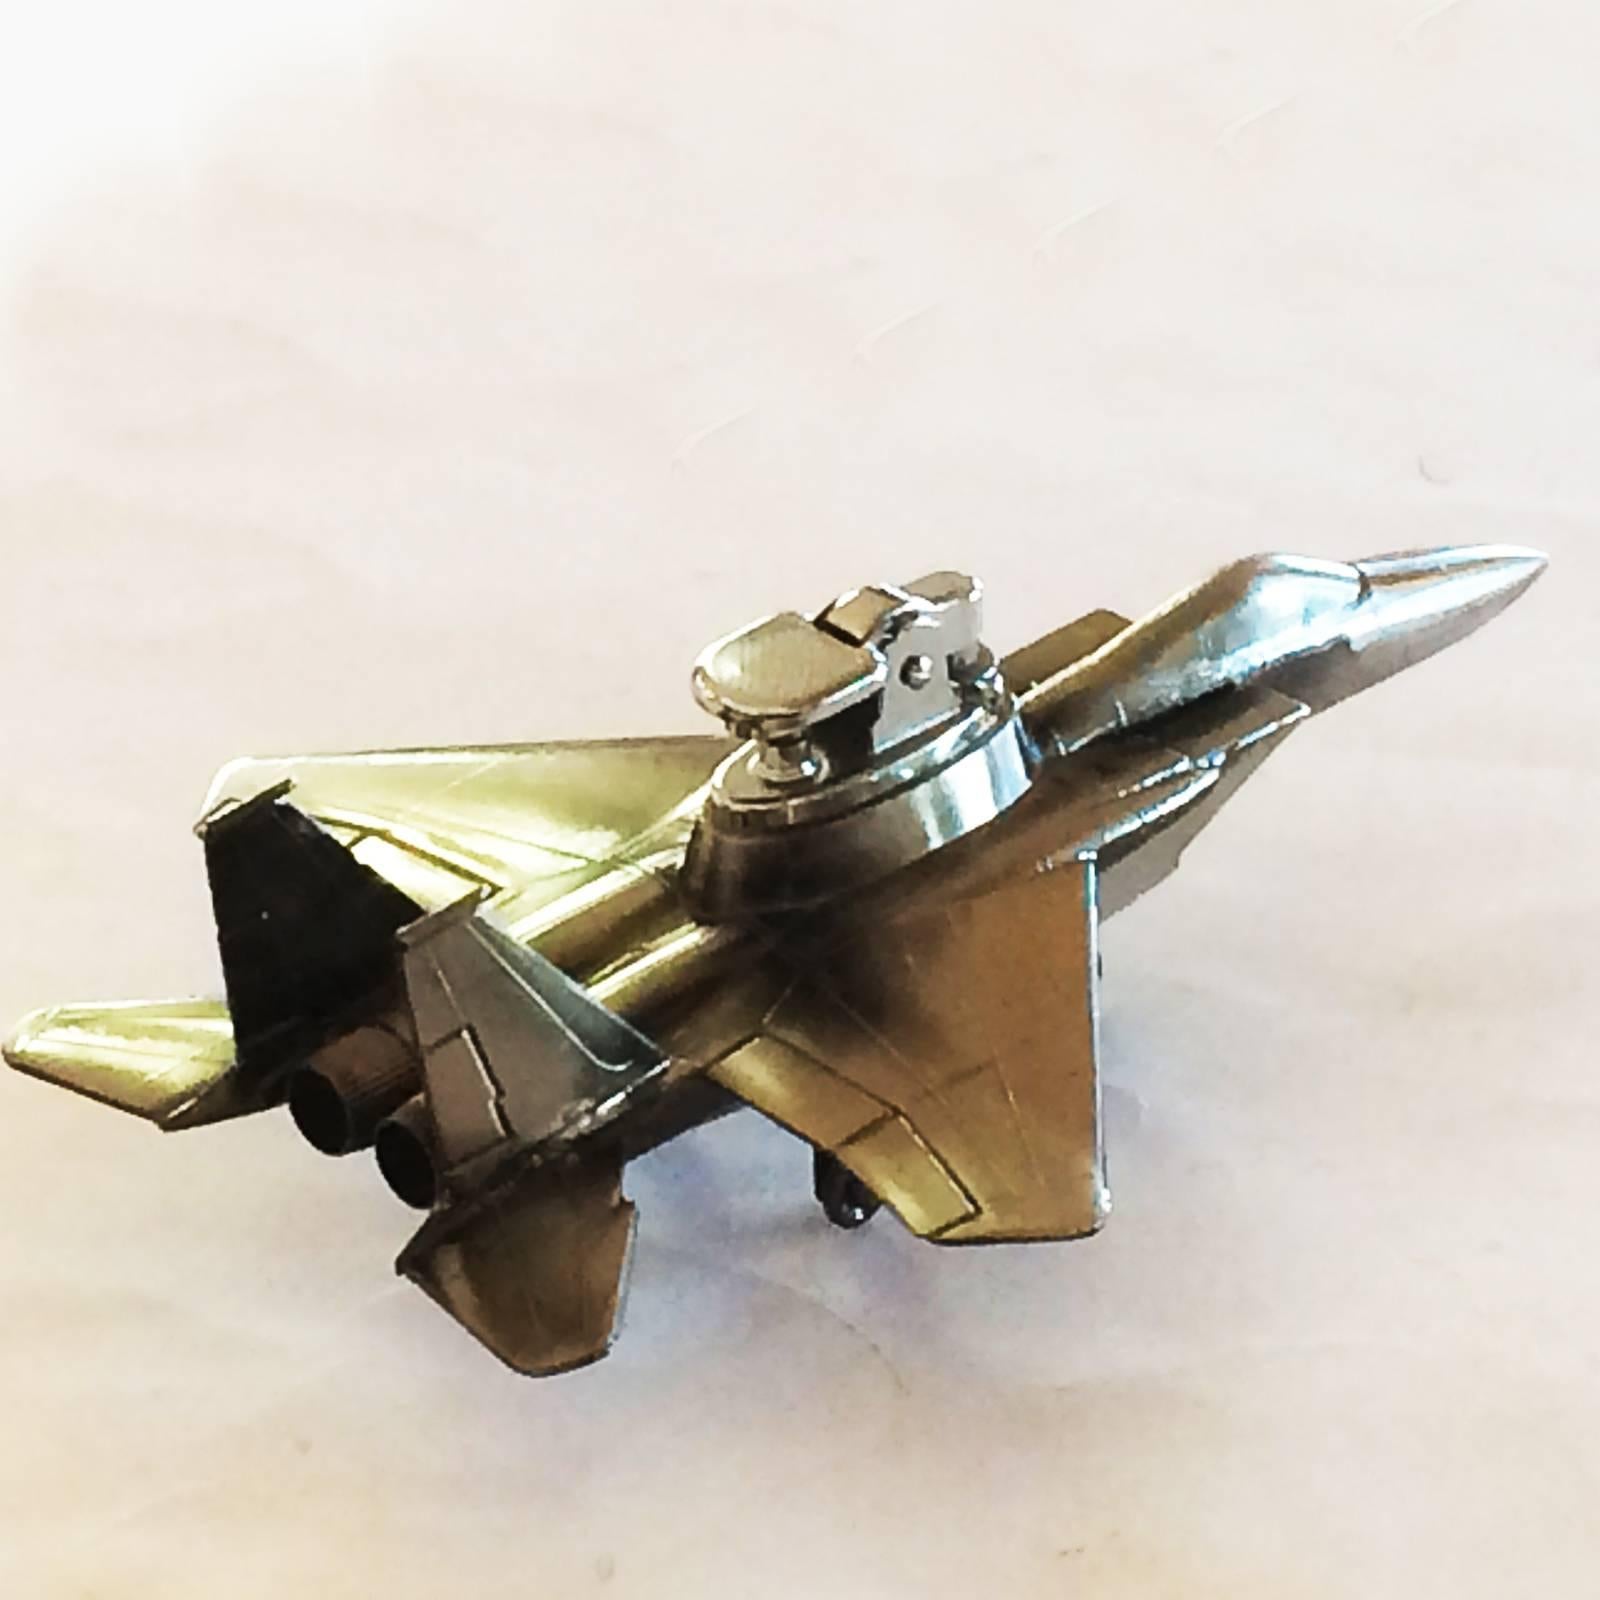 Midcentury cigarette lighter by Manufacturer Hamiltons, USA, who brought out a different Model annually, starting 1930. This is an F-15 Eagle jet, designed by McDonnell Douglas, first flights 1972, Mach 2.5+. Fitted with removable Gas lighter, being